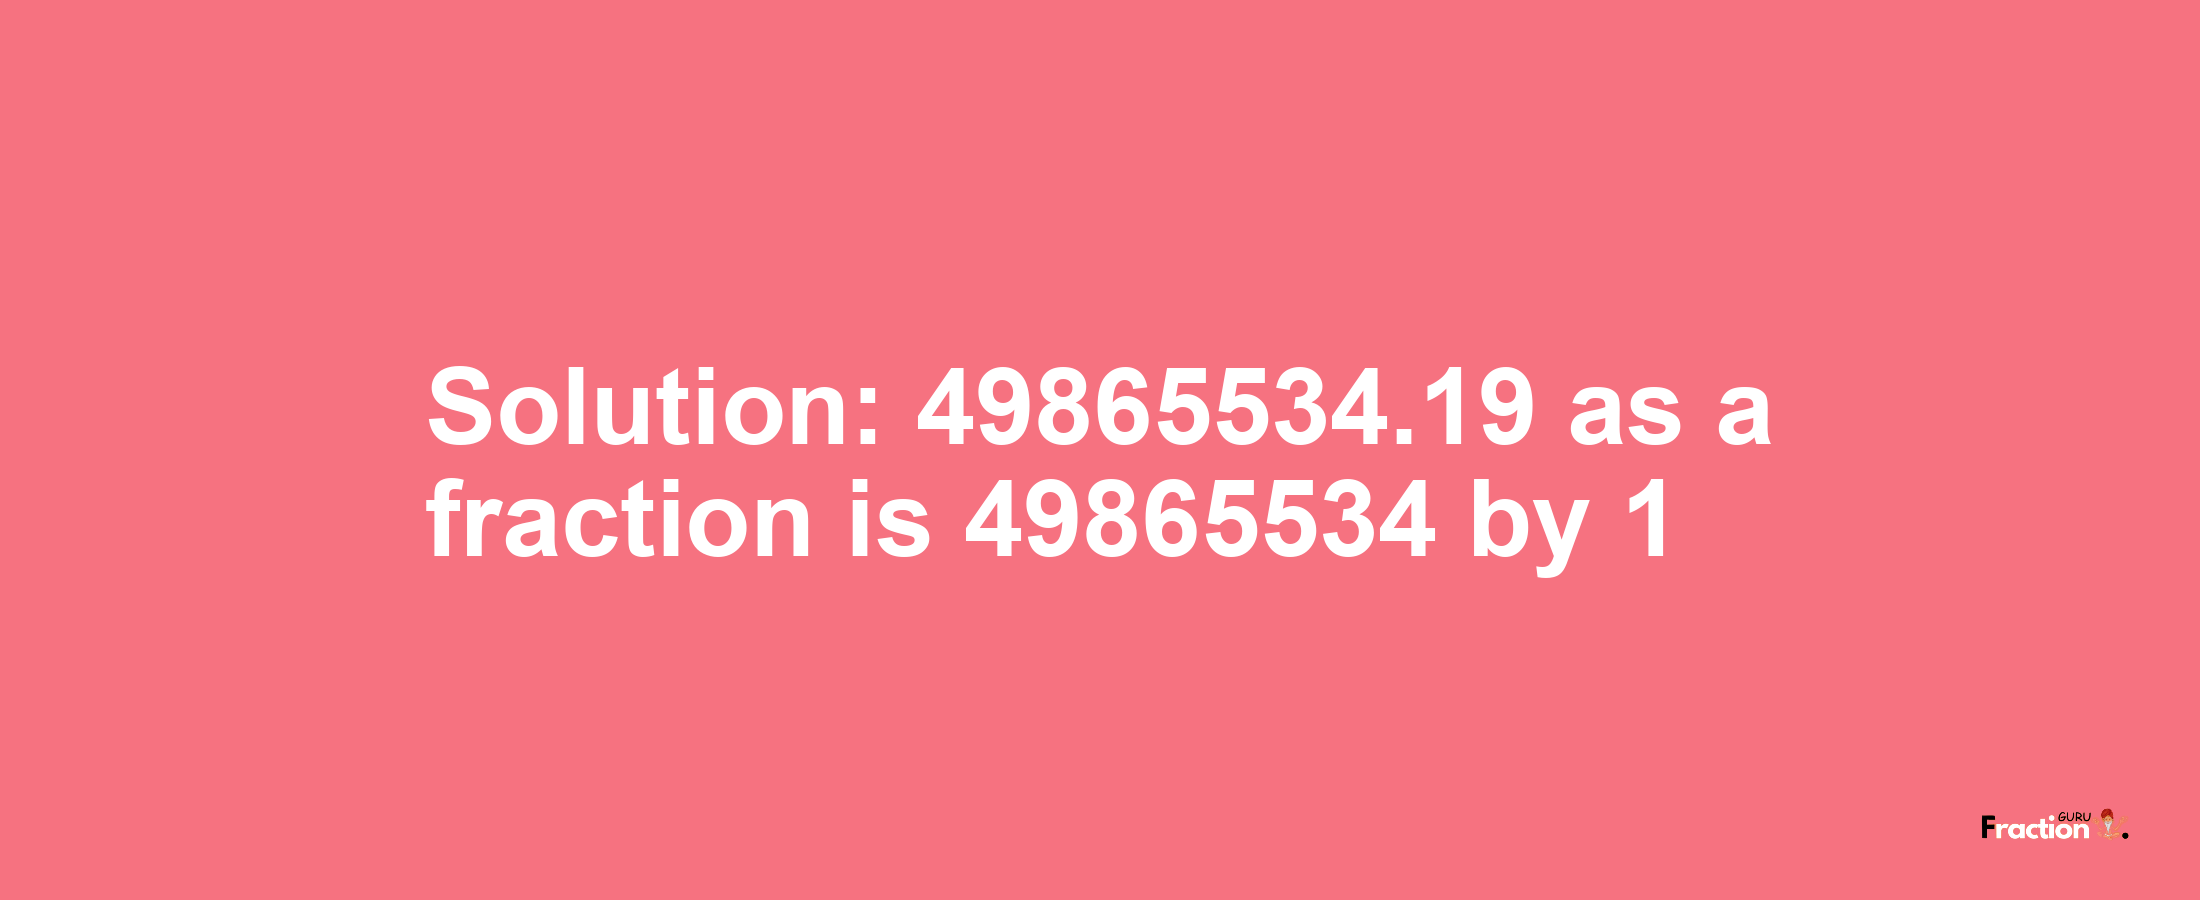 Solution:49865534.19 as a fraction is 49865534/1